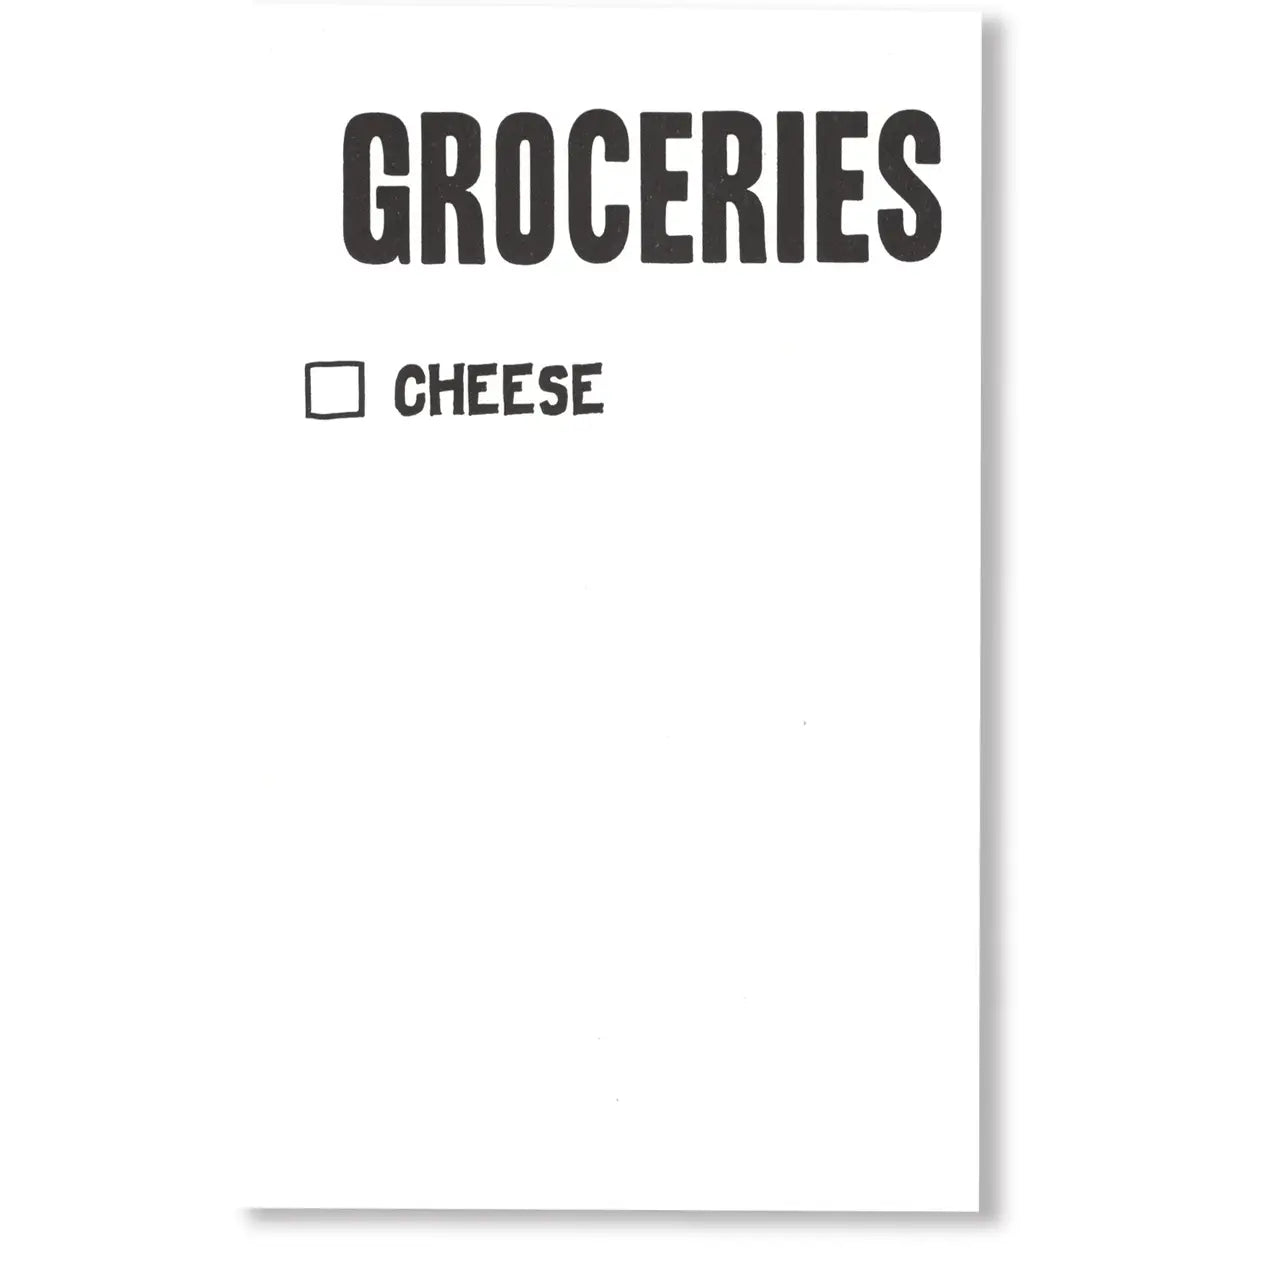 Mostly blank white notepad that says "Groceries" on top and only "Cheese" with a checkbox next to it 